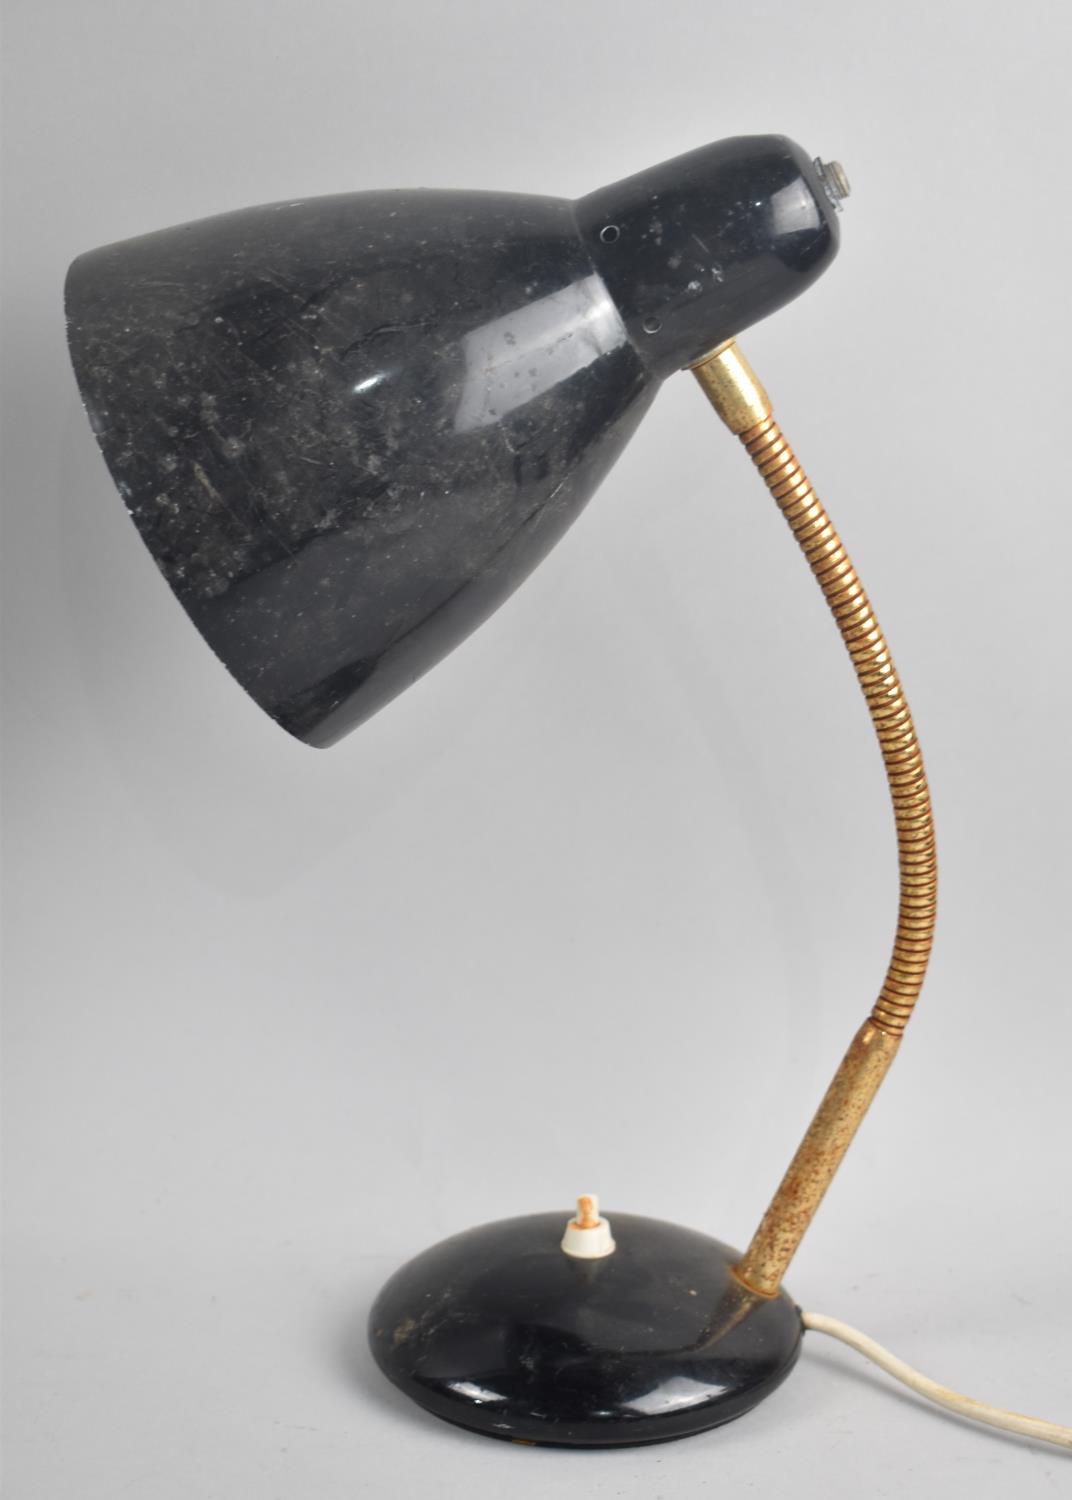 A Vintage Adjustable Desk Top Reading Lamp, Condition Issues